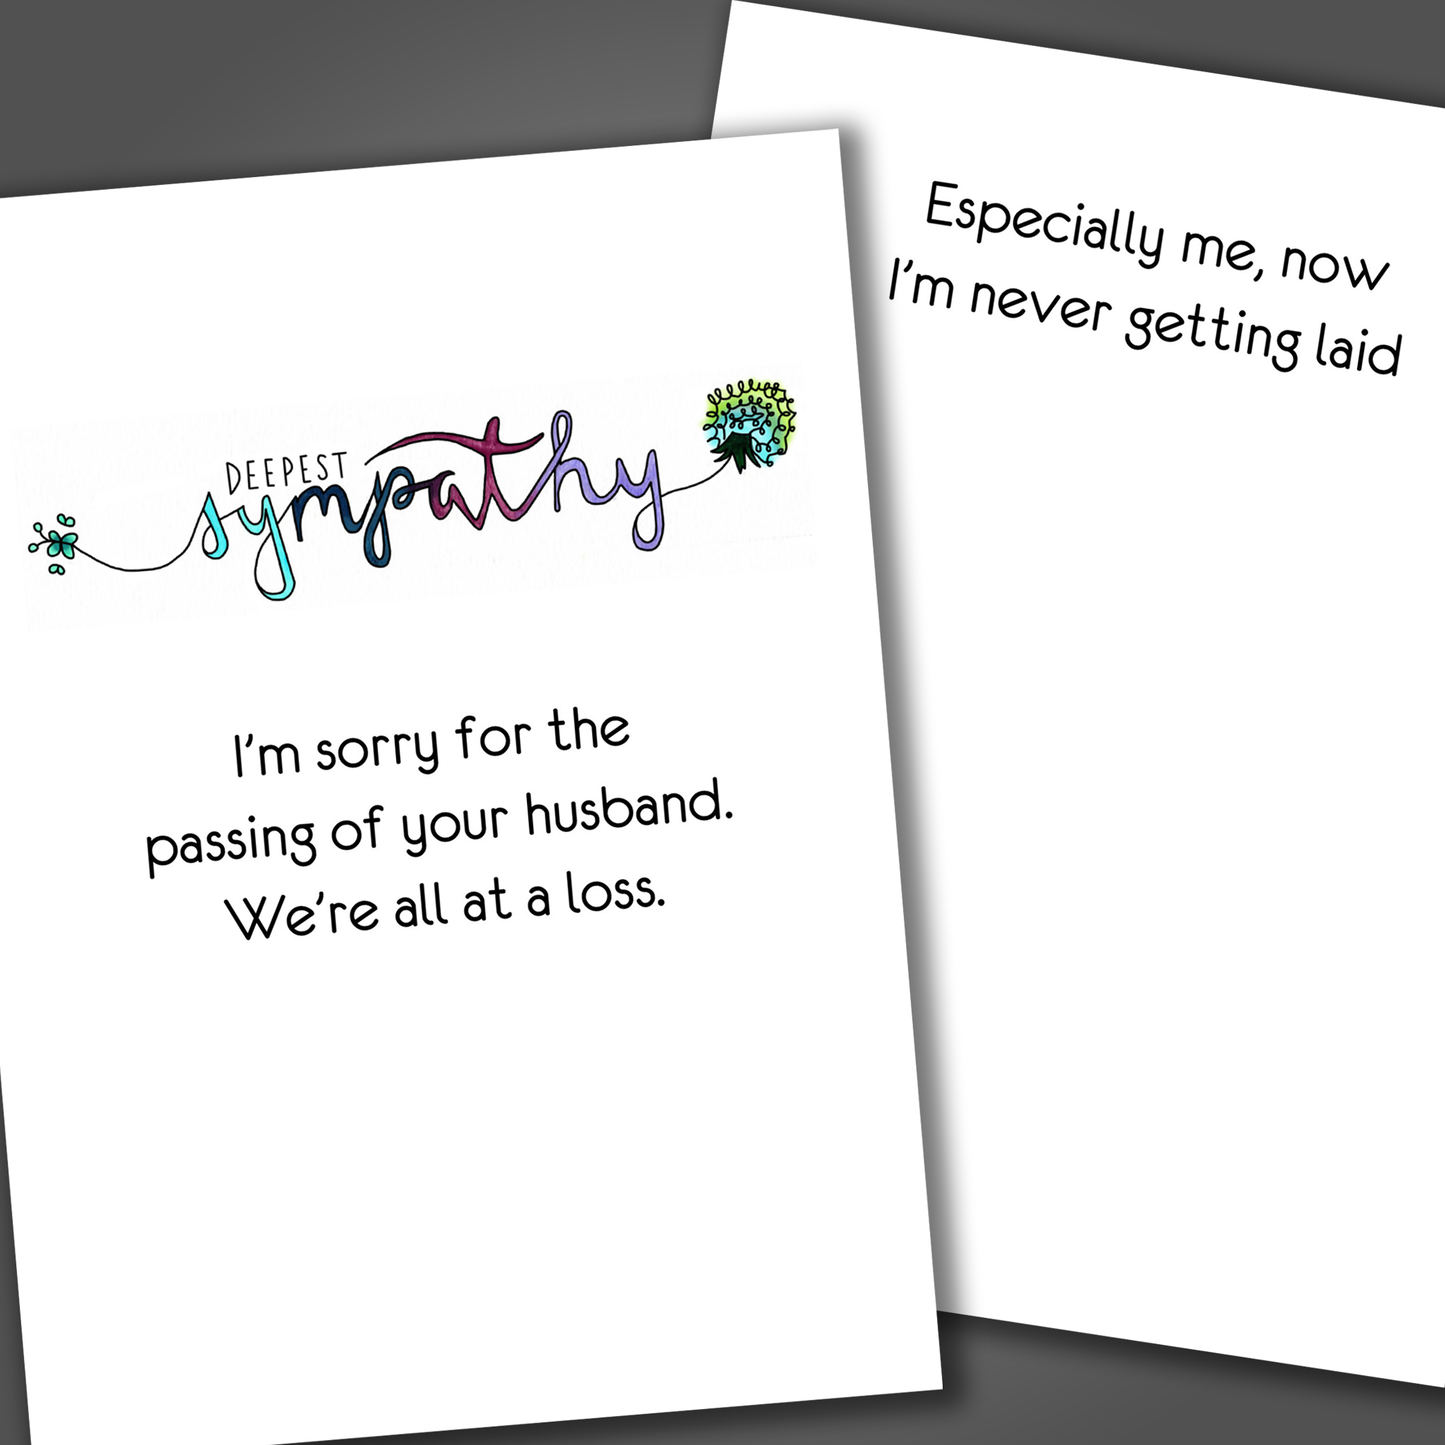 Funny sympathy card for loss of a father with the word sympathy drawn in various colors on the front of the card. Inside the card is a funny joke that ends in now I'm never getting laid.